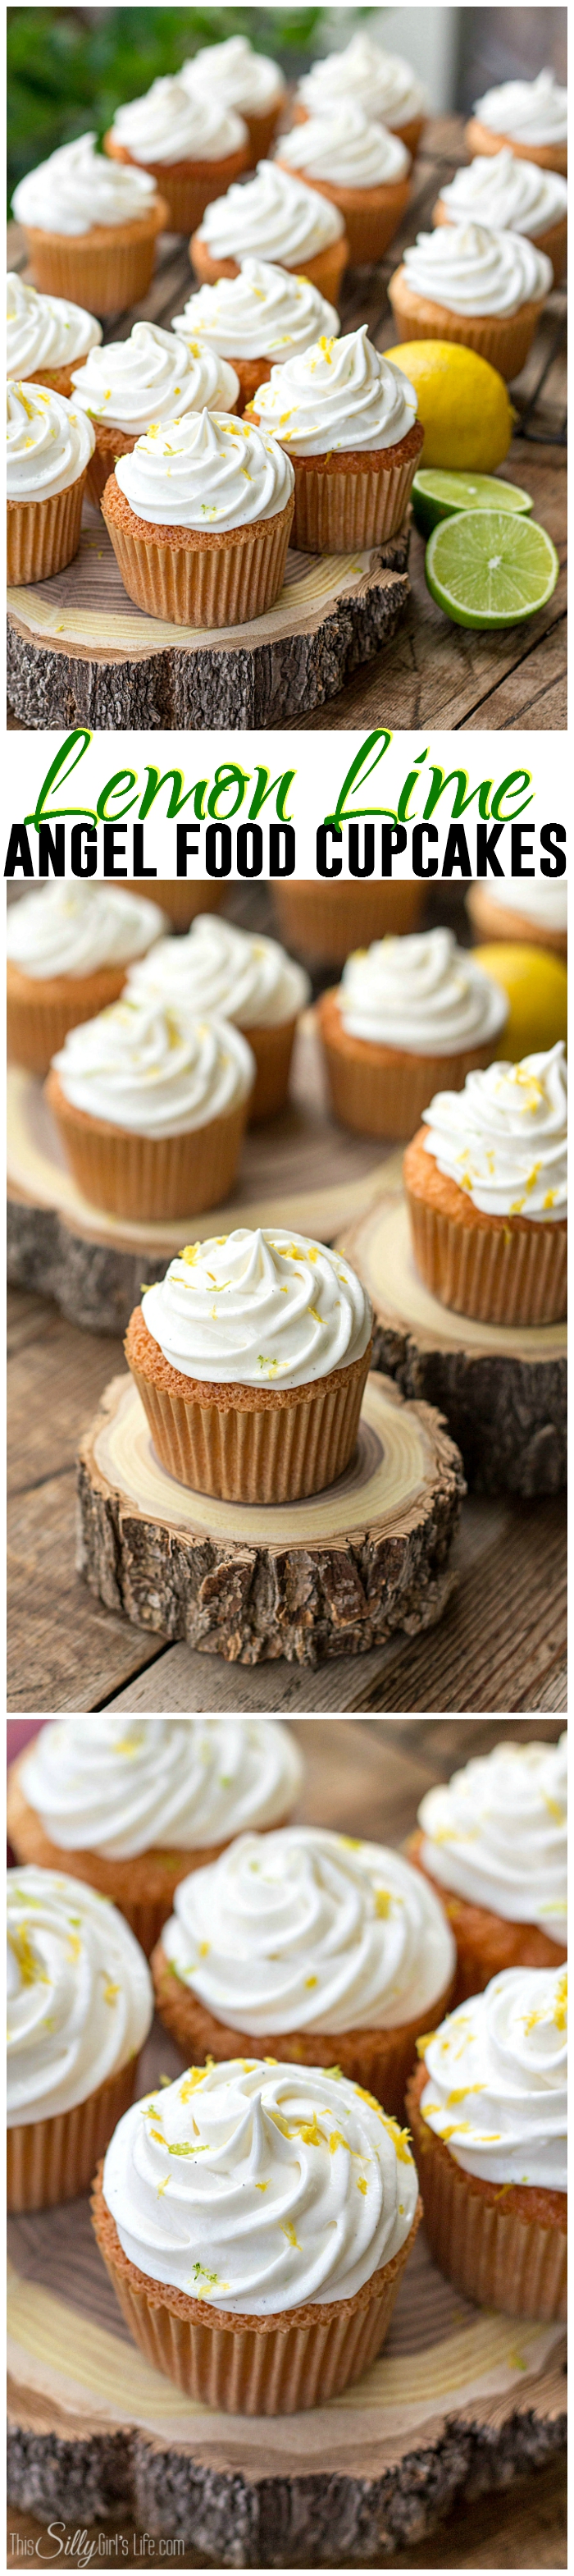 Lemon Lime Angel Food Cupcakes, light as air homemade angel food cupcakes and whipped frosting, flavored with lemon and lime zest! - ThisSillyGirlsLife.com #angelfood #whippedfrosting #lemonlime